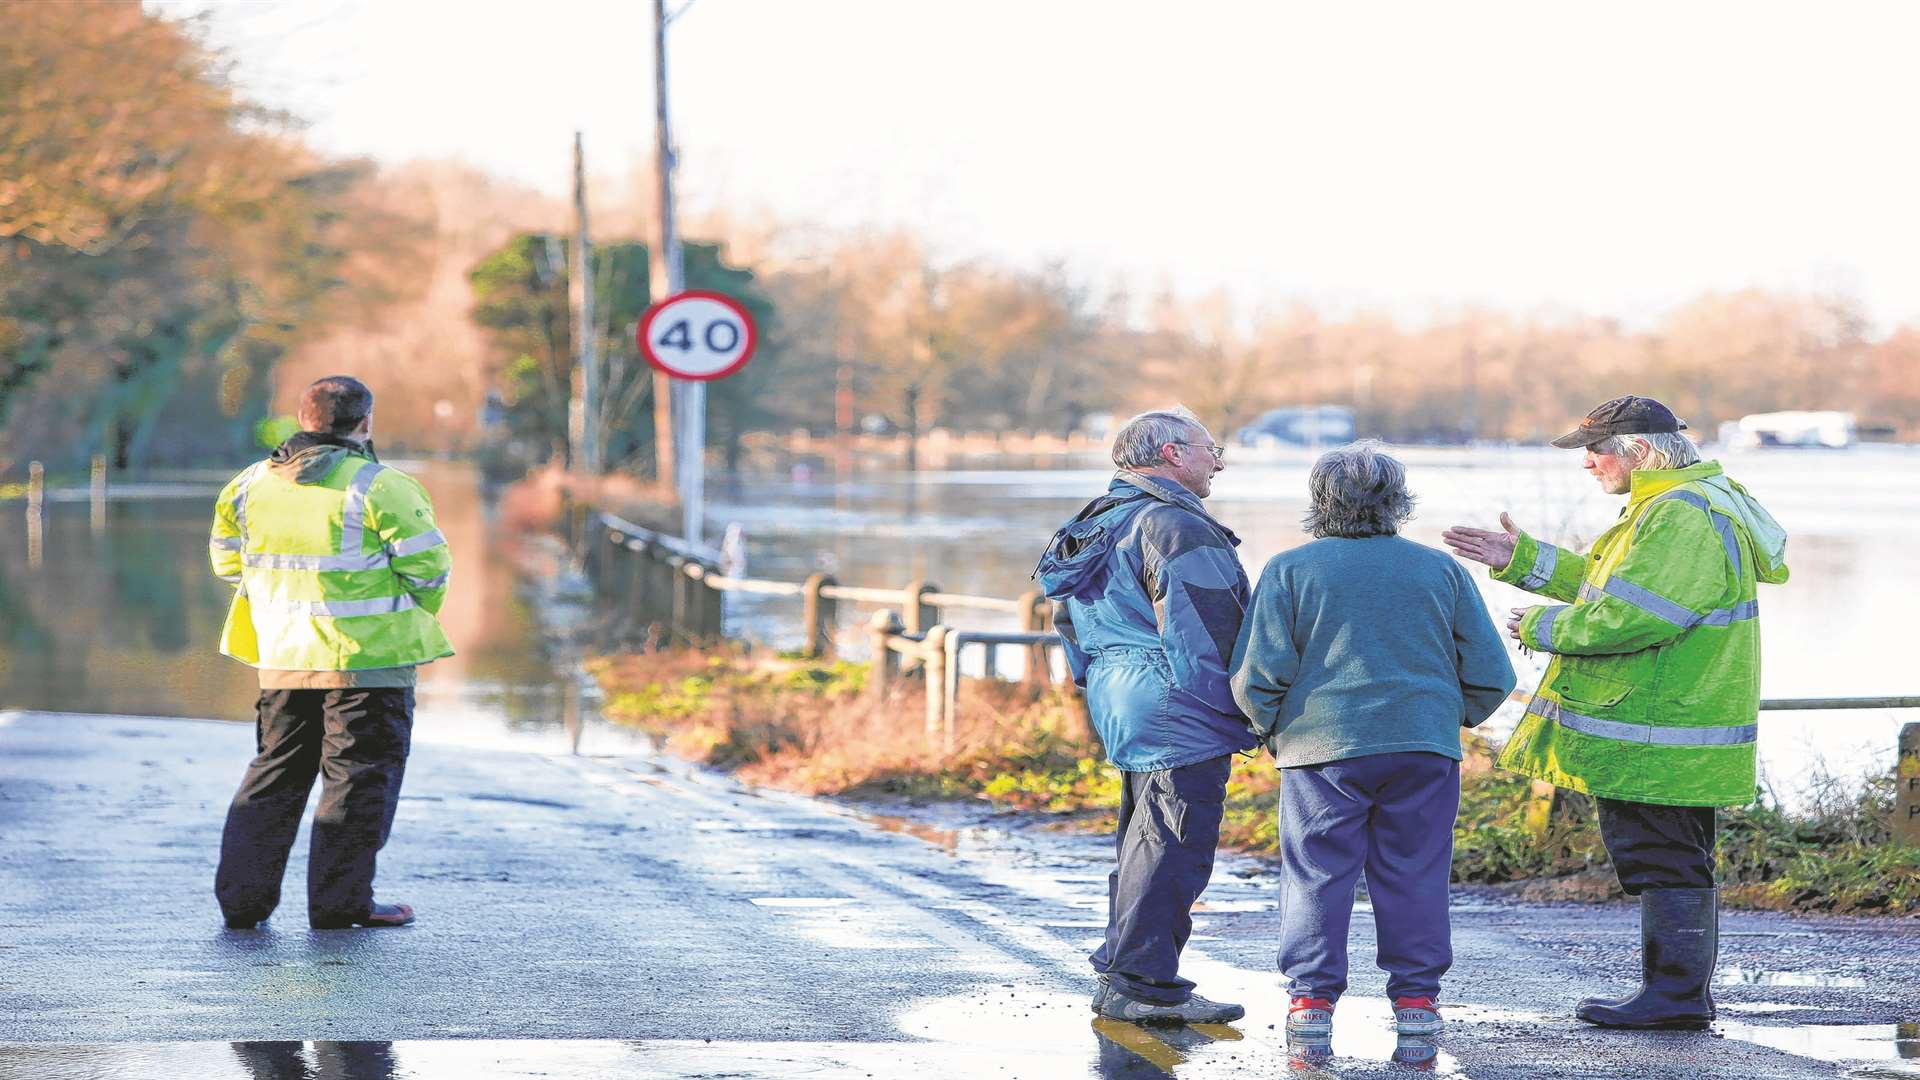 Flooding in Yalding over the New Year along Hampstead Lane and Lees Road. The Environment Agency and members of the public look at the flood water.